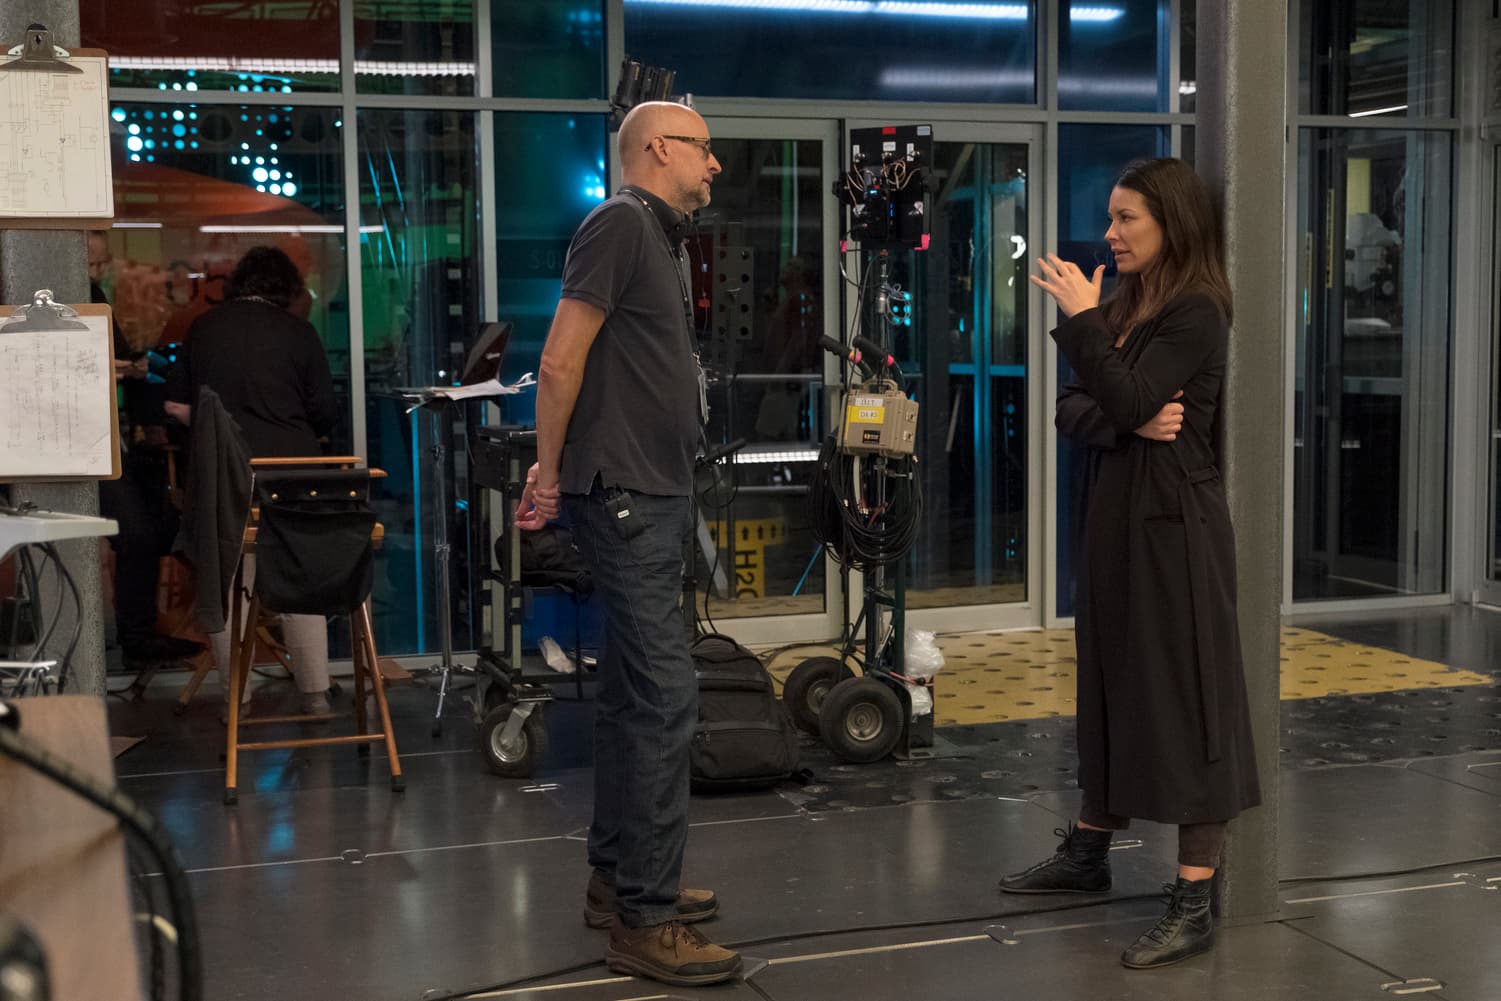 Evangeline Lilly and Peyton Reed on the set of Ant-Man and the Wasp